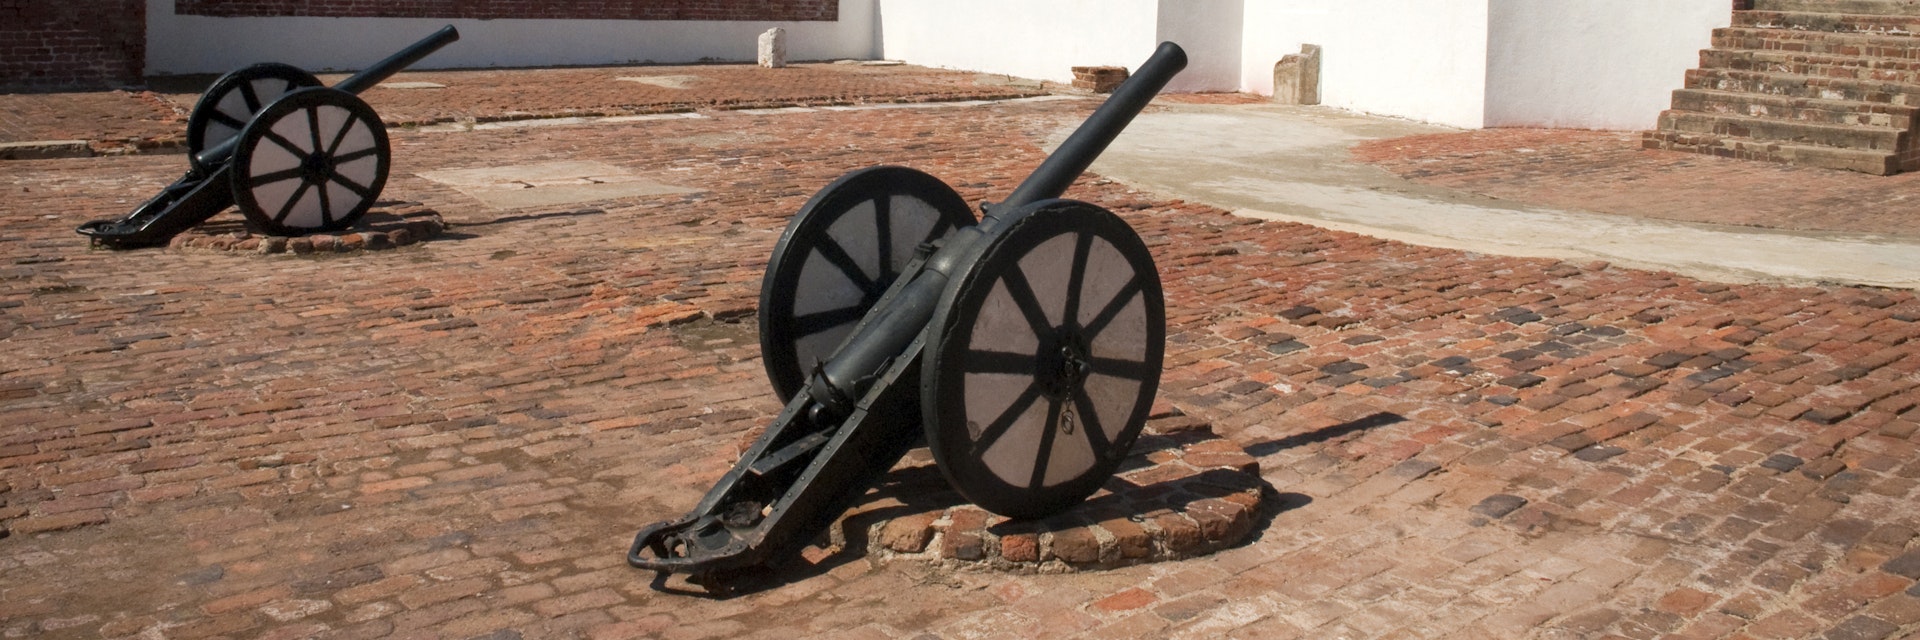 Cannons and tower in courtyard of Fort Charles.